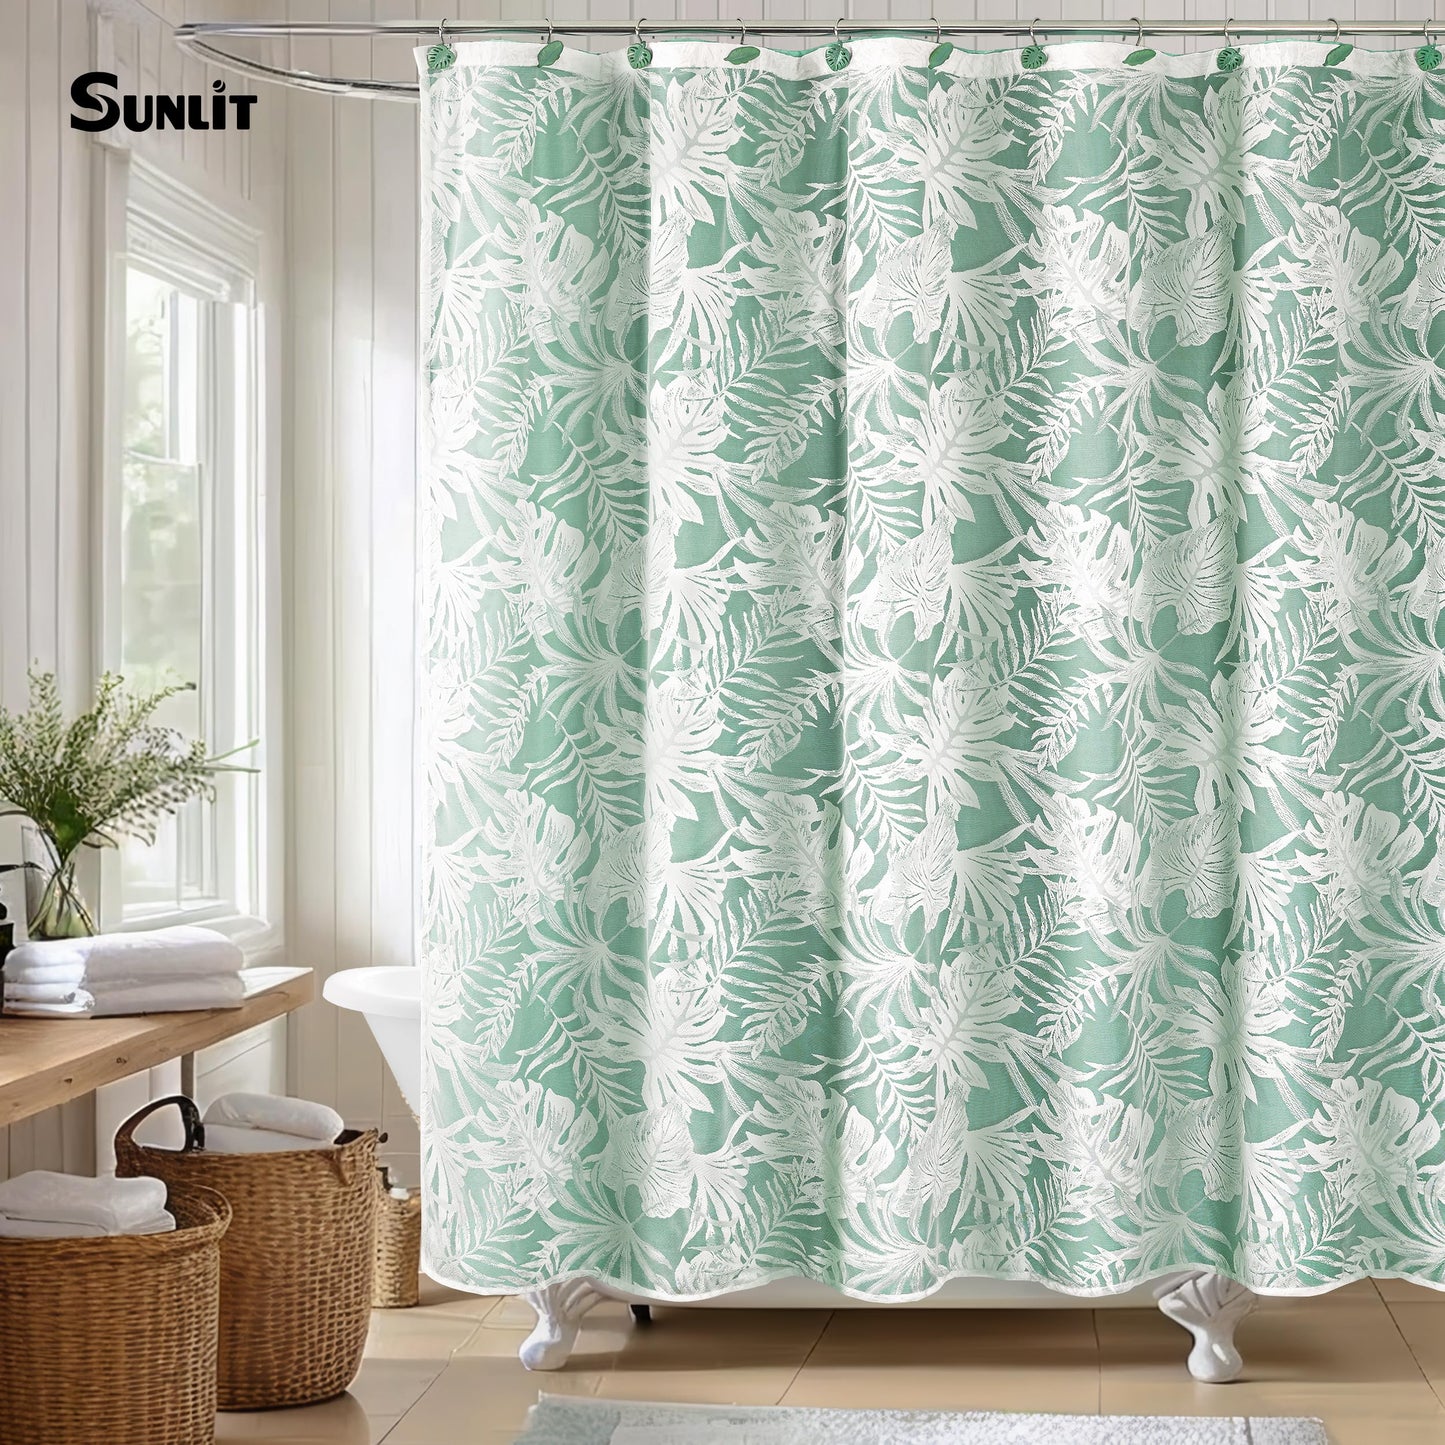 White Palm Leaves Fabric Shower Curtains with Green Liner, Tropical Leaf Detachable Double Layer Shower Curtain for Bathroom, Water-Repellent Home Bathroom Decor, 71x71 Inch